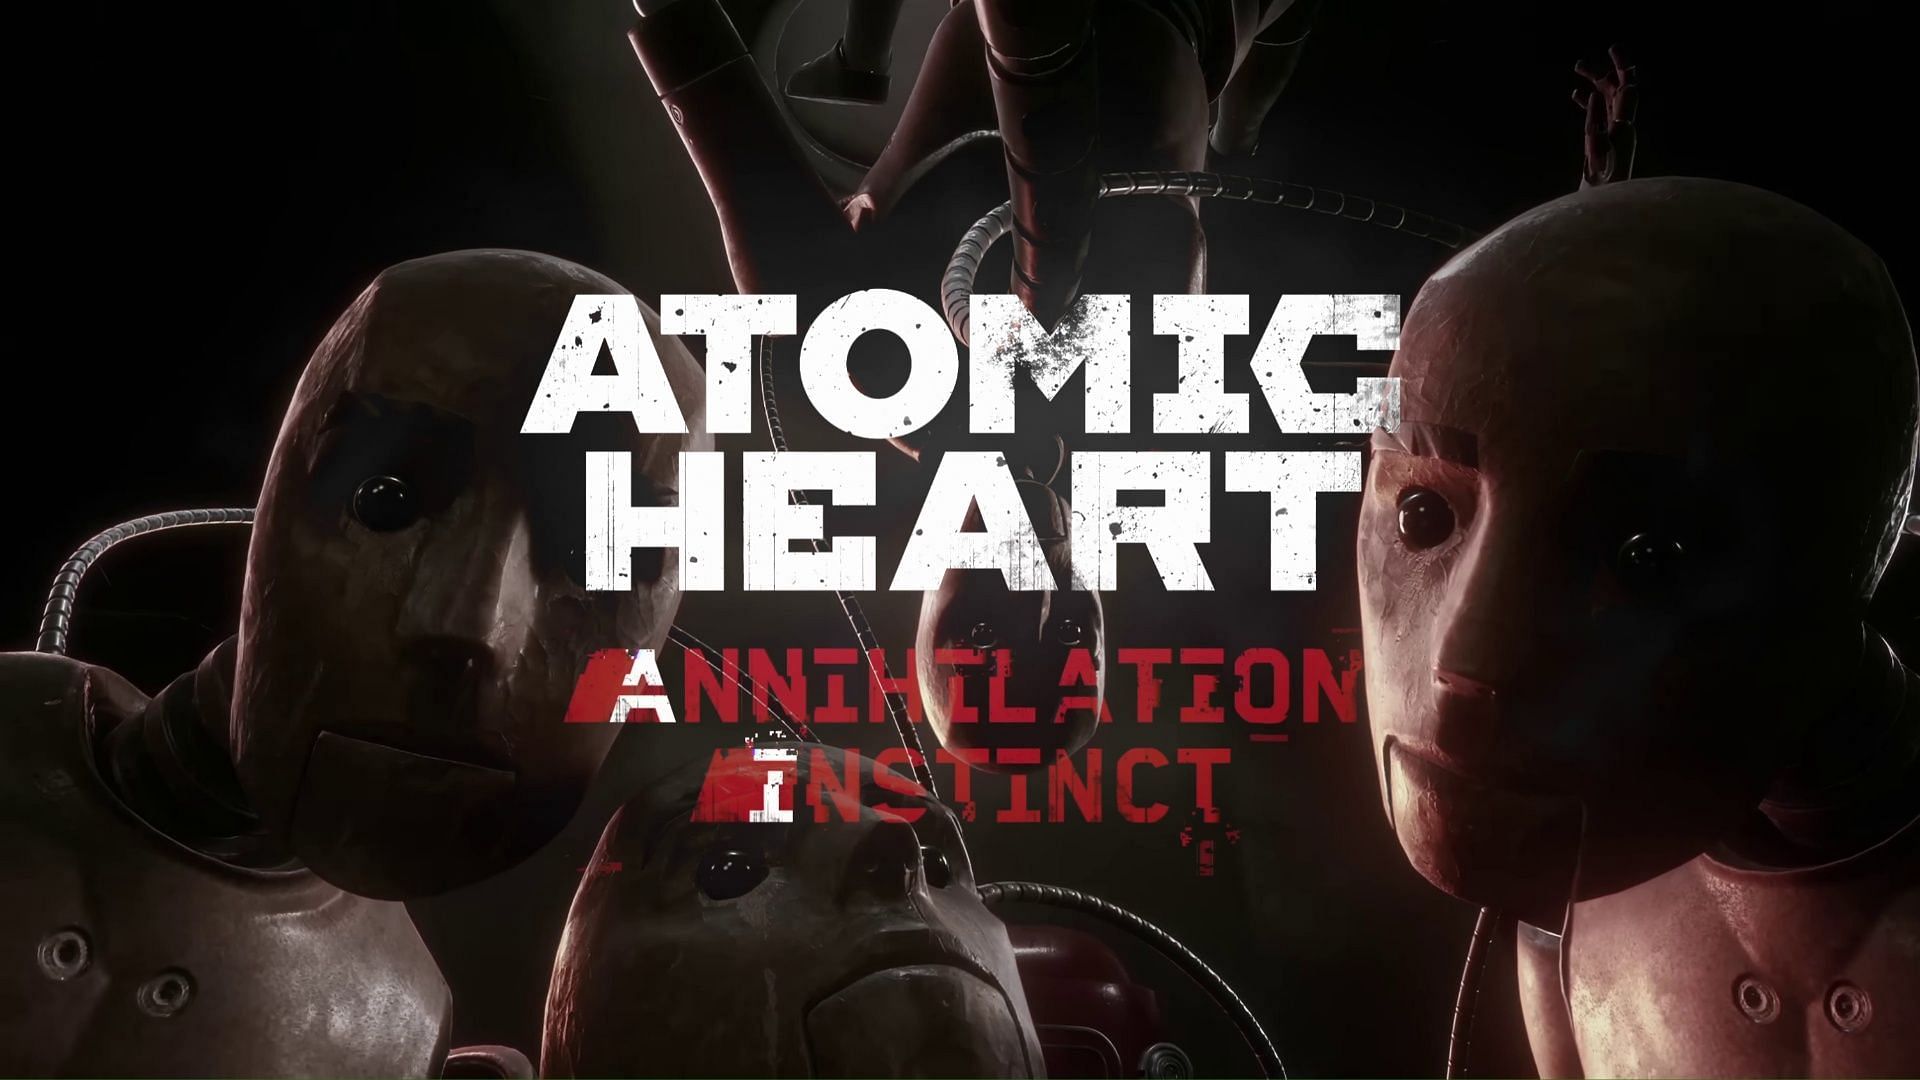 Atomic Heart Annihilation Instinct key art, featuring the new enemies that players will be facing in the upcoming expansion (Image via Mundfish)